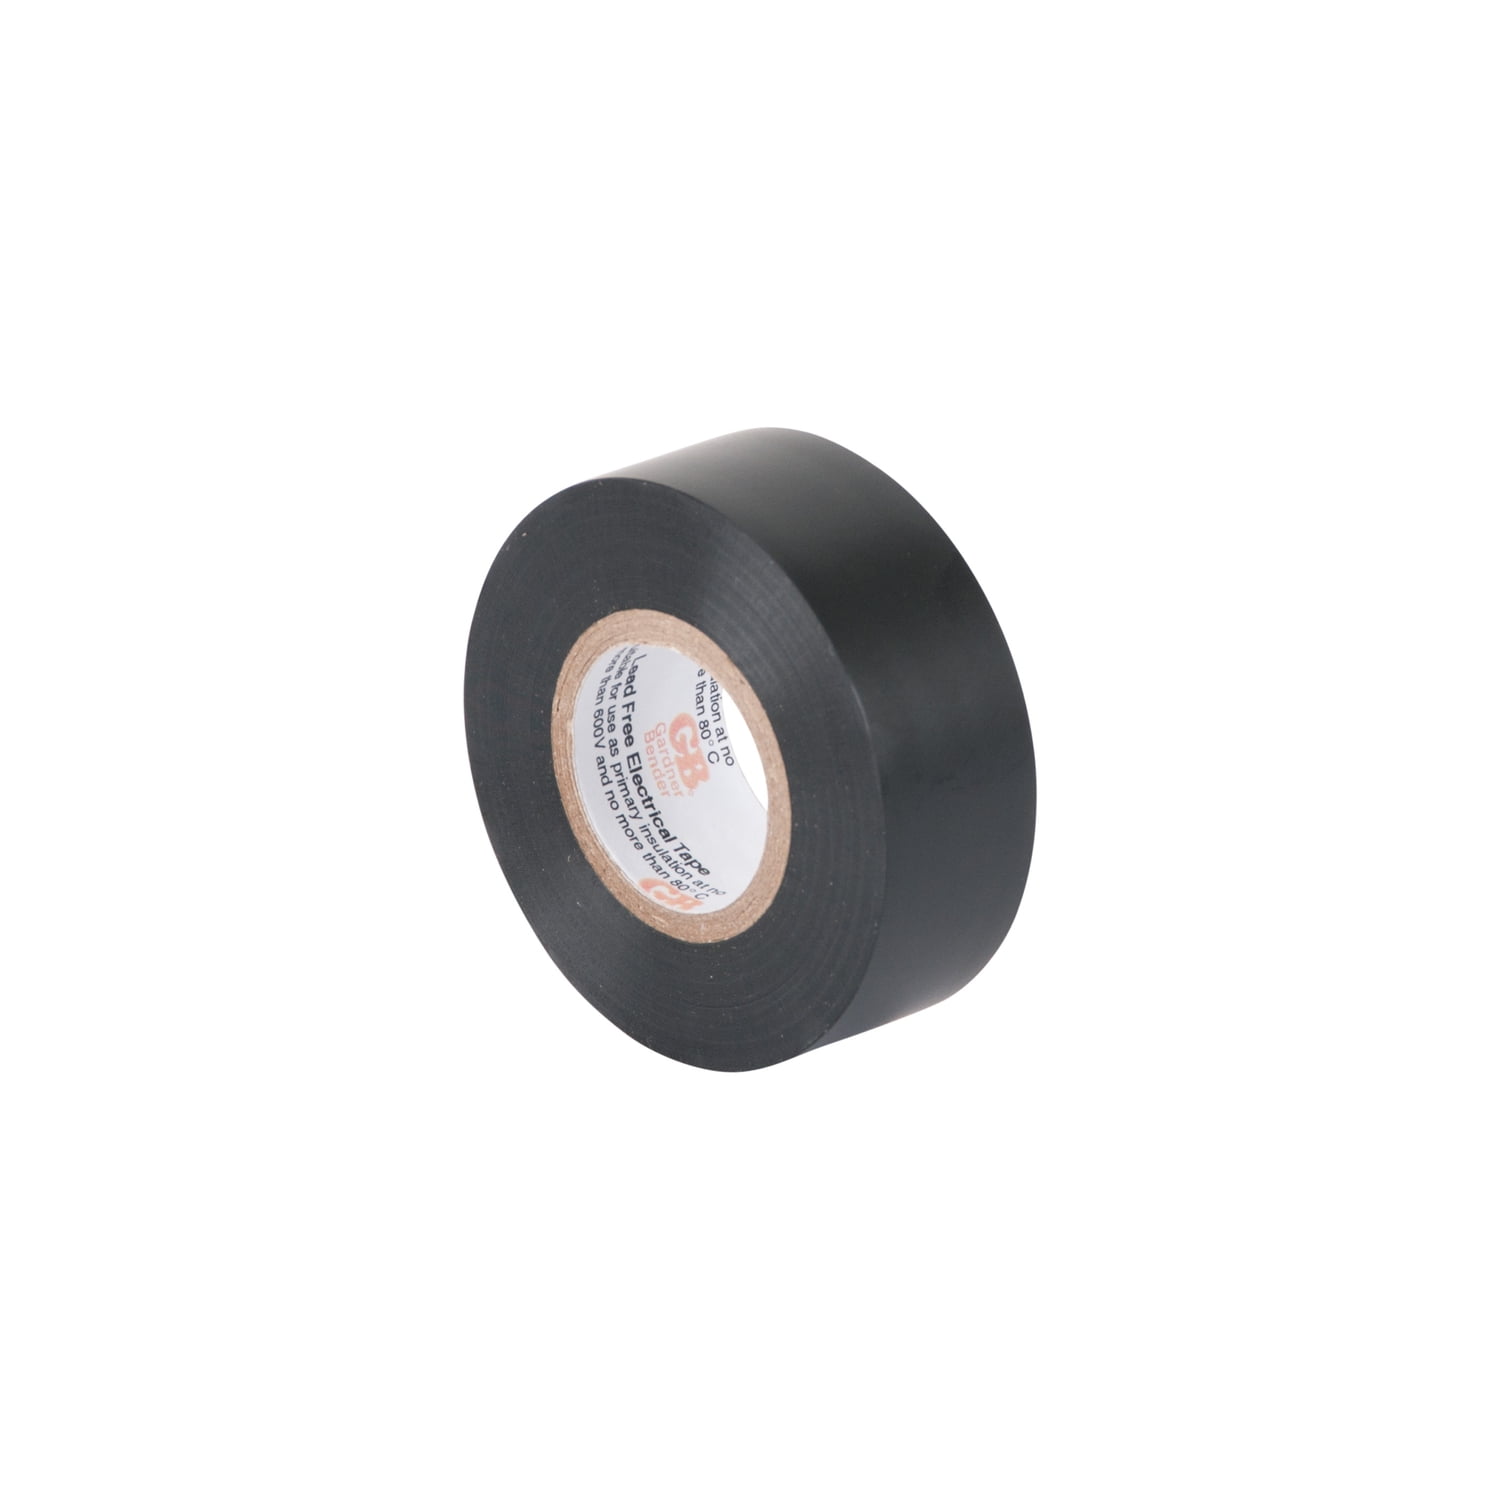 Nippon ET11 Electrical Tape 10 Pack 3/4" X 60' Rolls UL Listed 